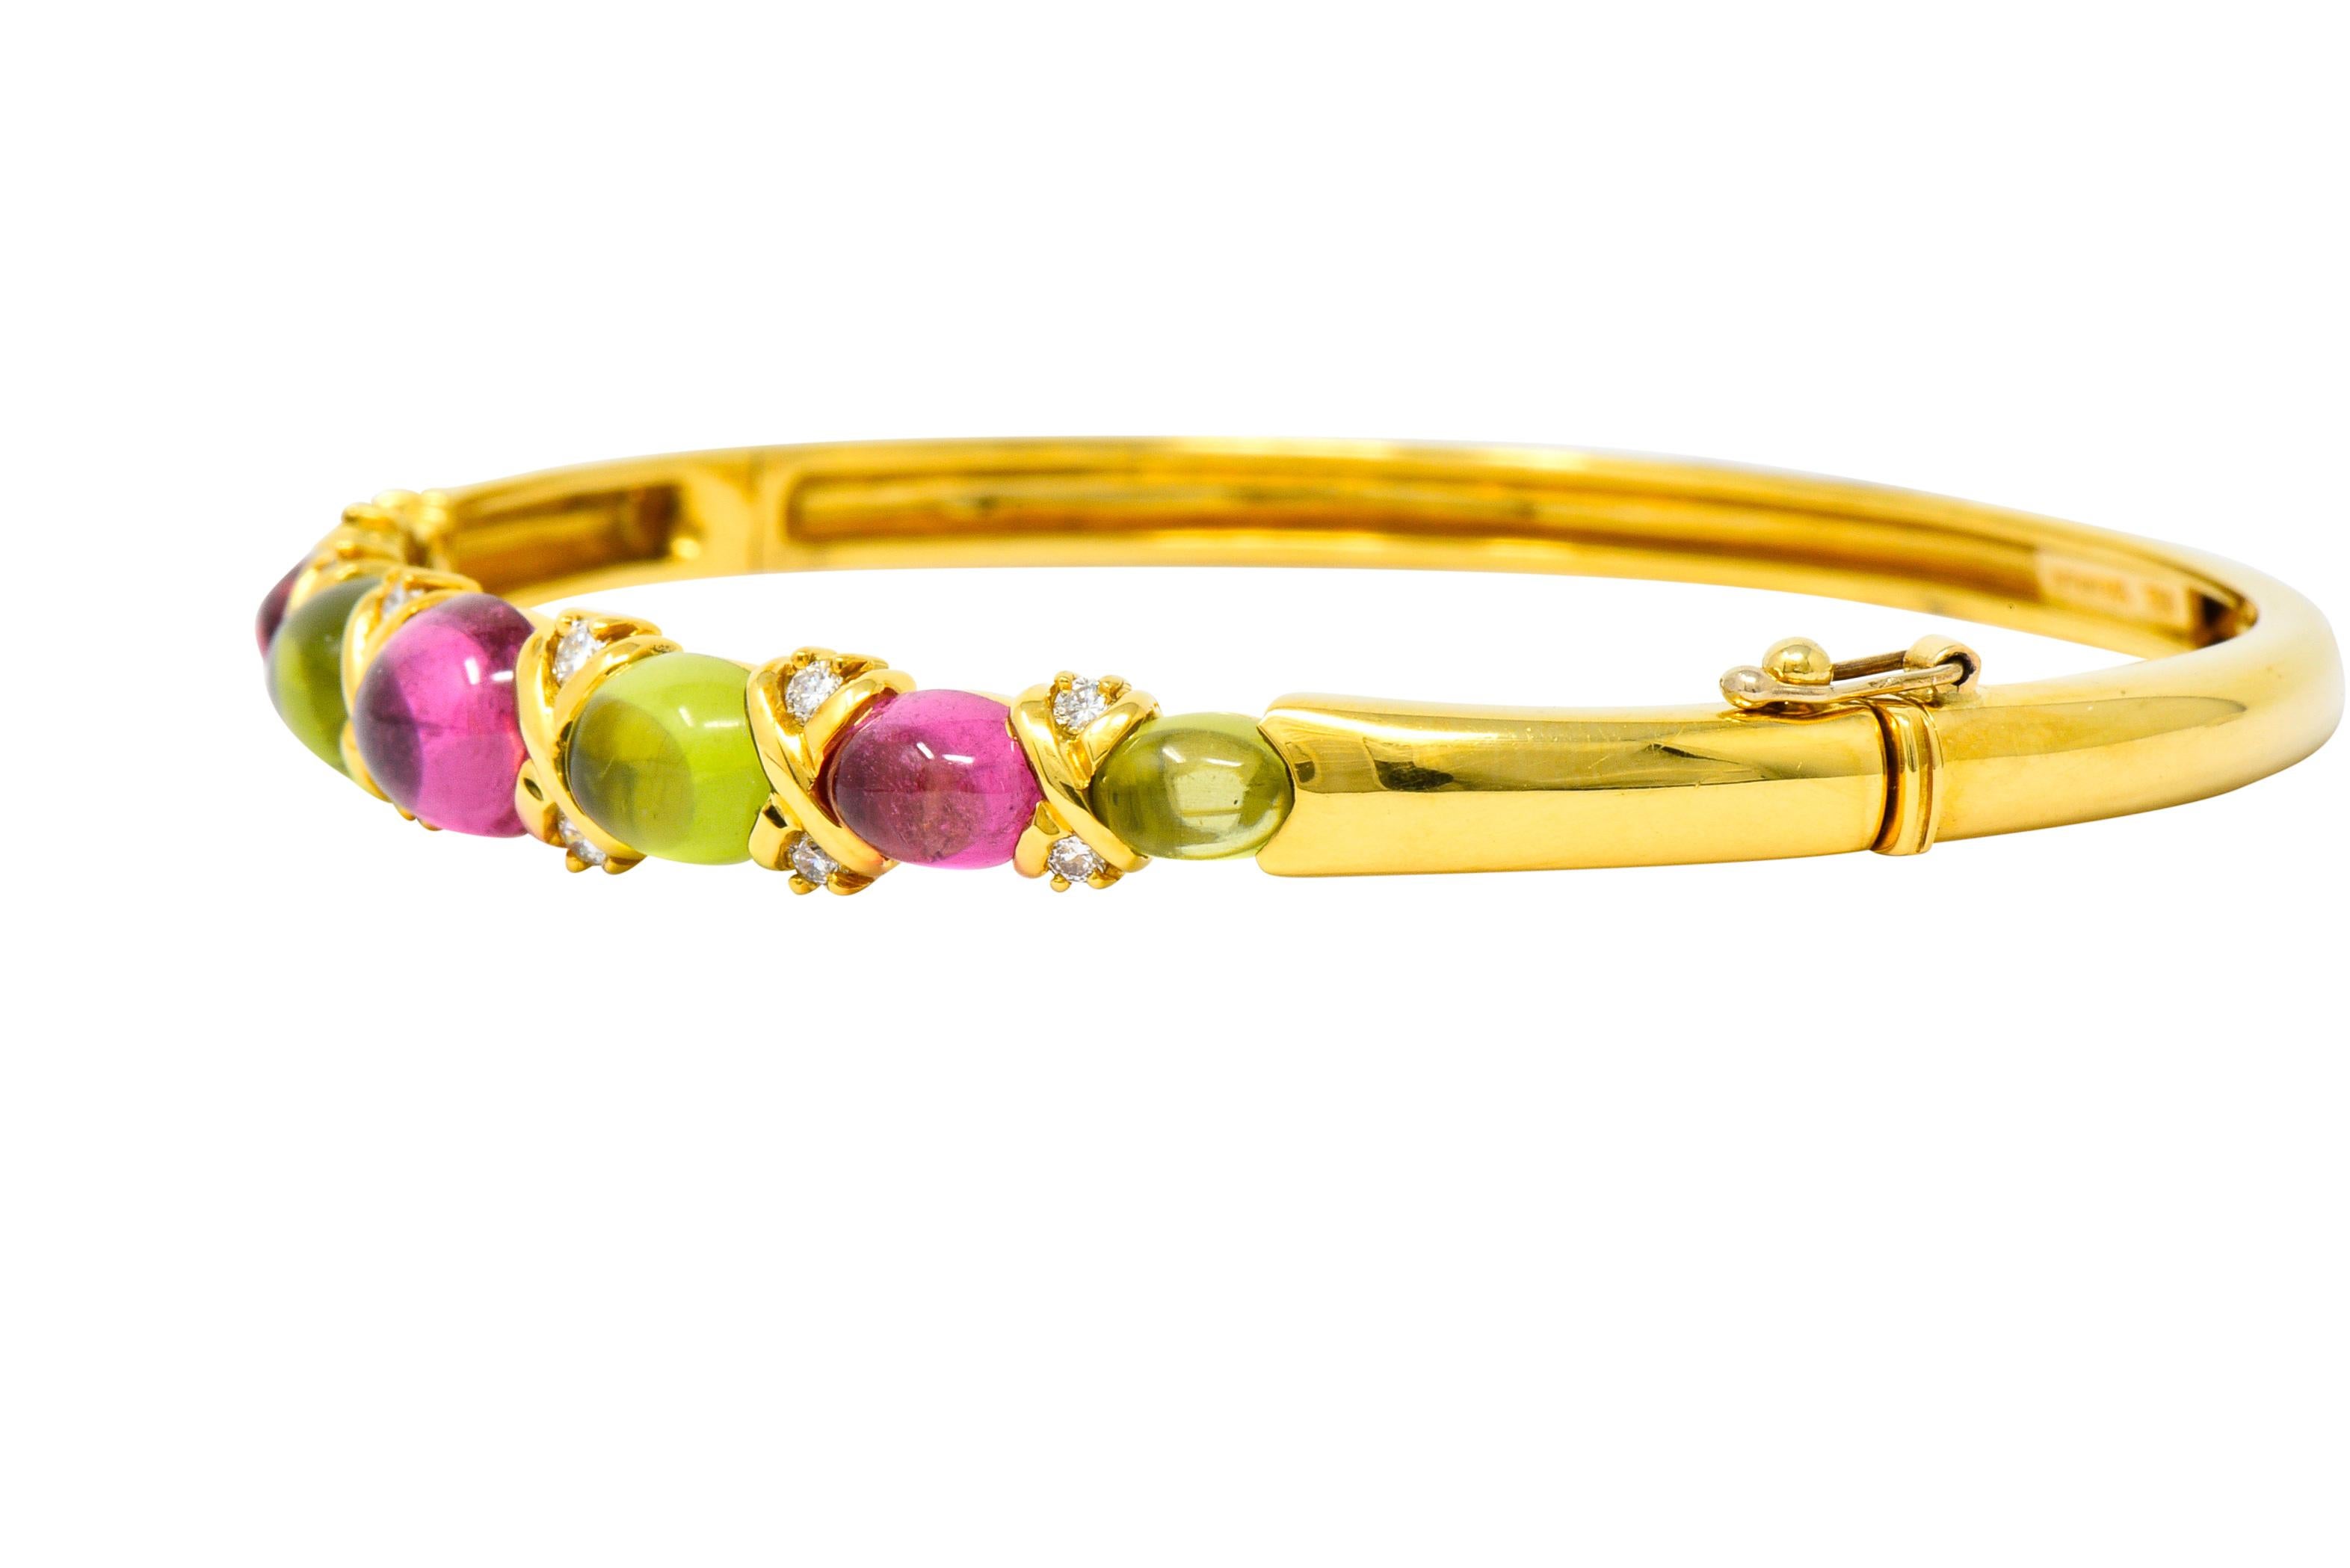 Hinged bangle bracelet set to front with oval cabochon peridot and pink tourmalines graduating in size from 4.0 x 5.0 mm to 7.0 x 8.0 mm

With polished X motif alternating between cabochons

Accented by round brilliant cut diamonds weighing